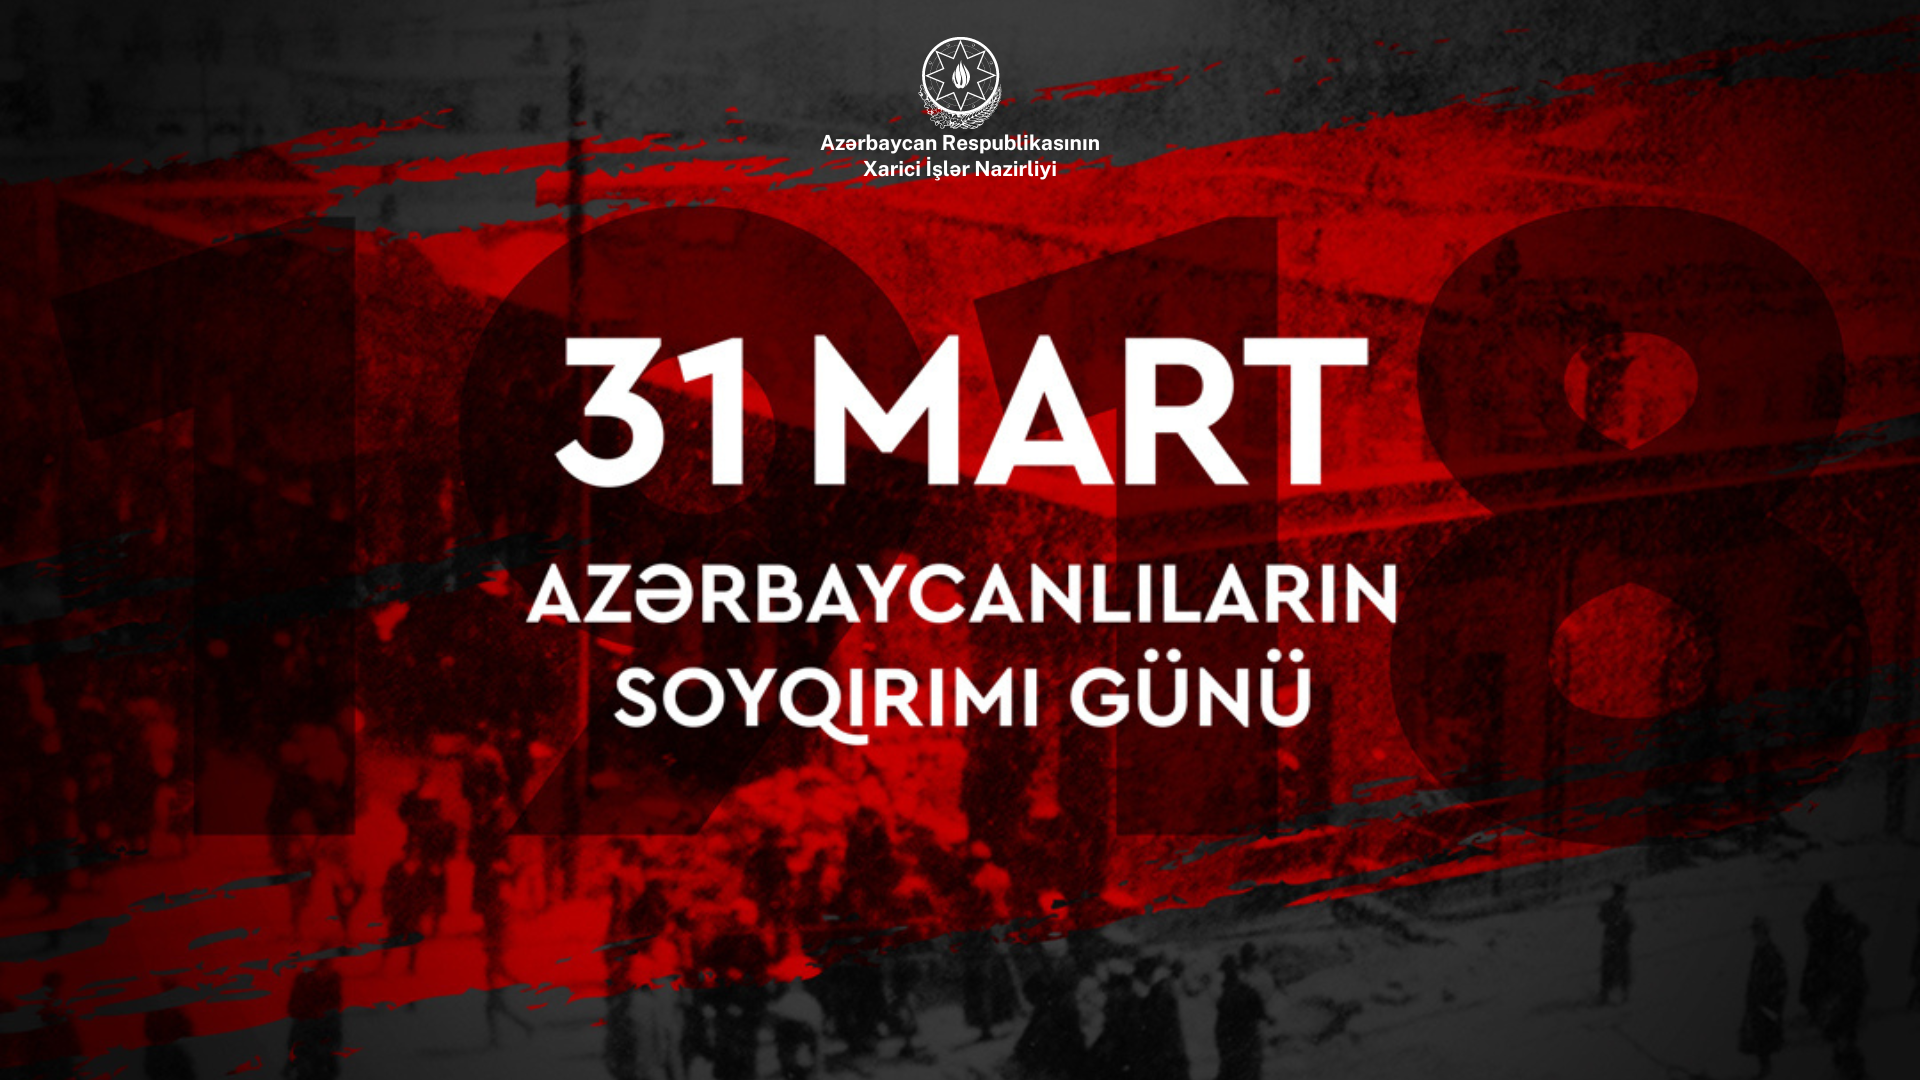 No:140/24, Statement by the Ministry of Foreign Affairs of the Republic of Azerbaijan on 31 March – Day of Genocide of Azerbaijanis Xeber basligi